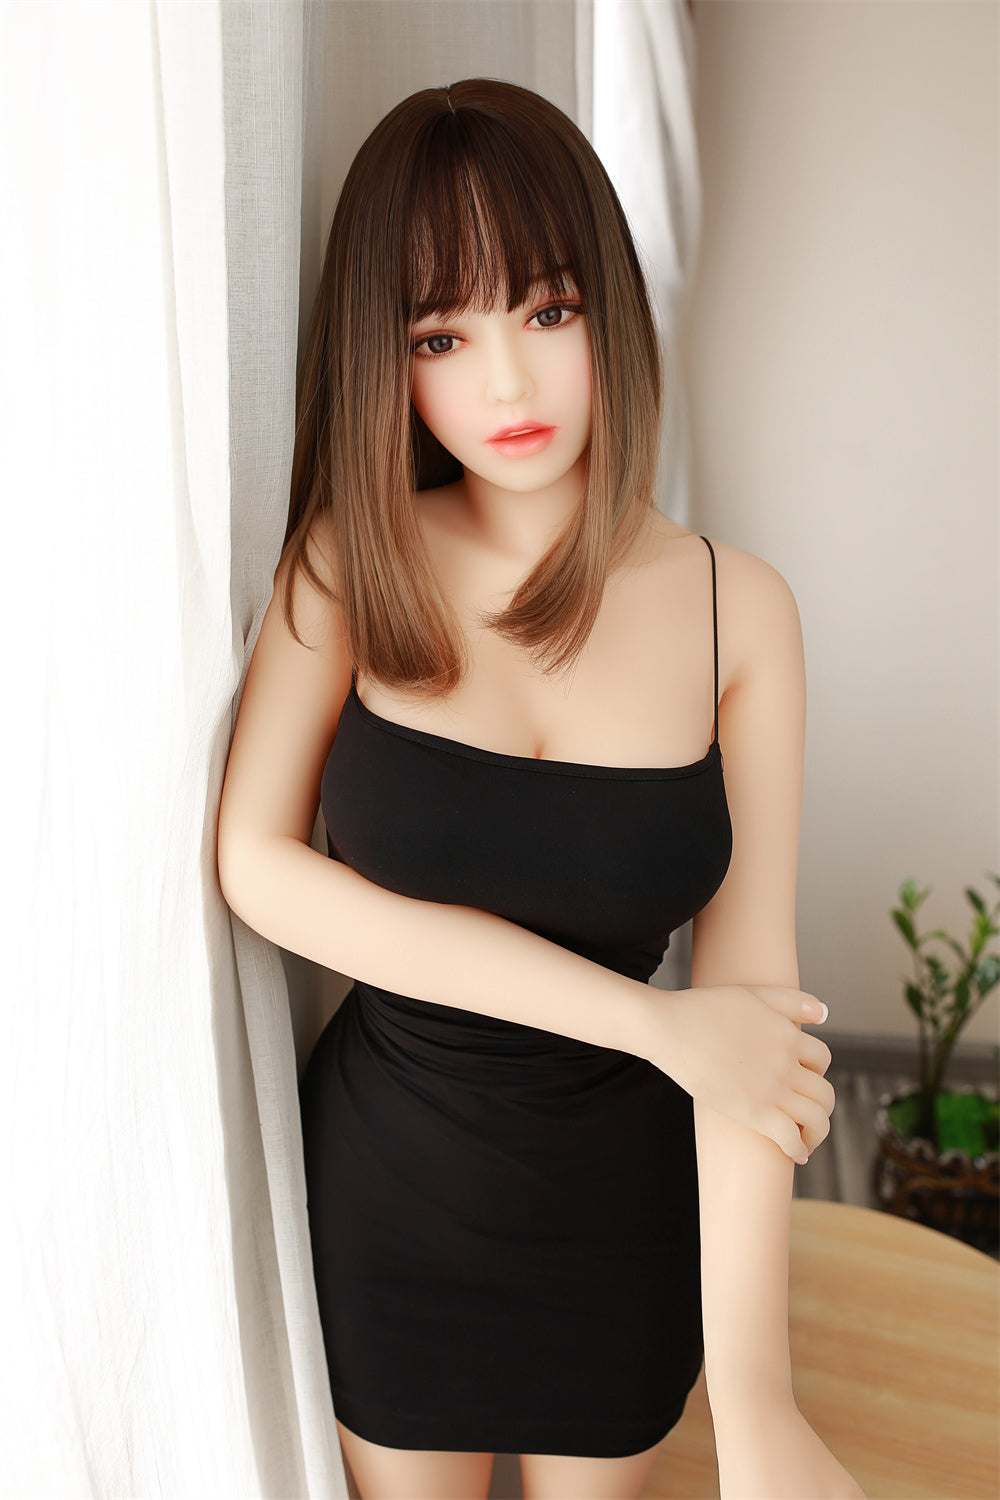 Kennedy #137-6 Realistic TPE Sex Doll Asian Adult Love Doll